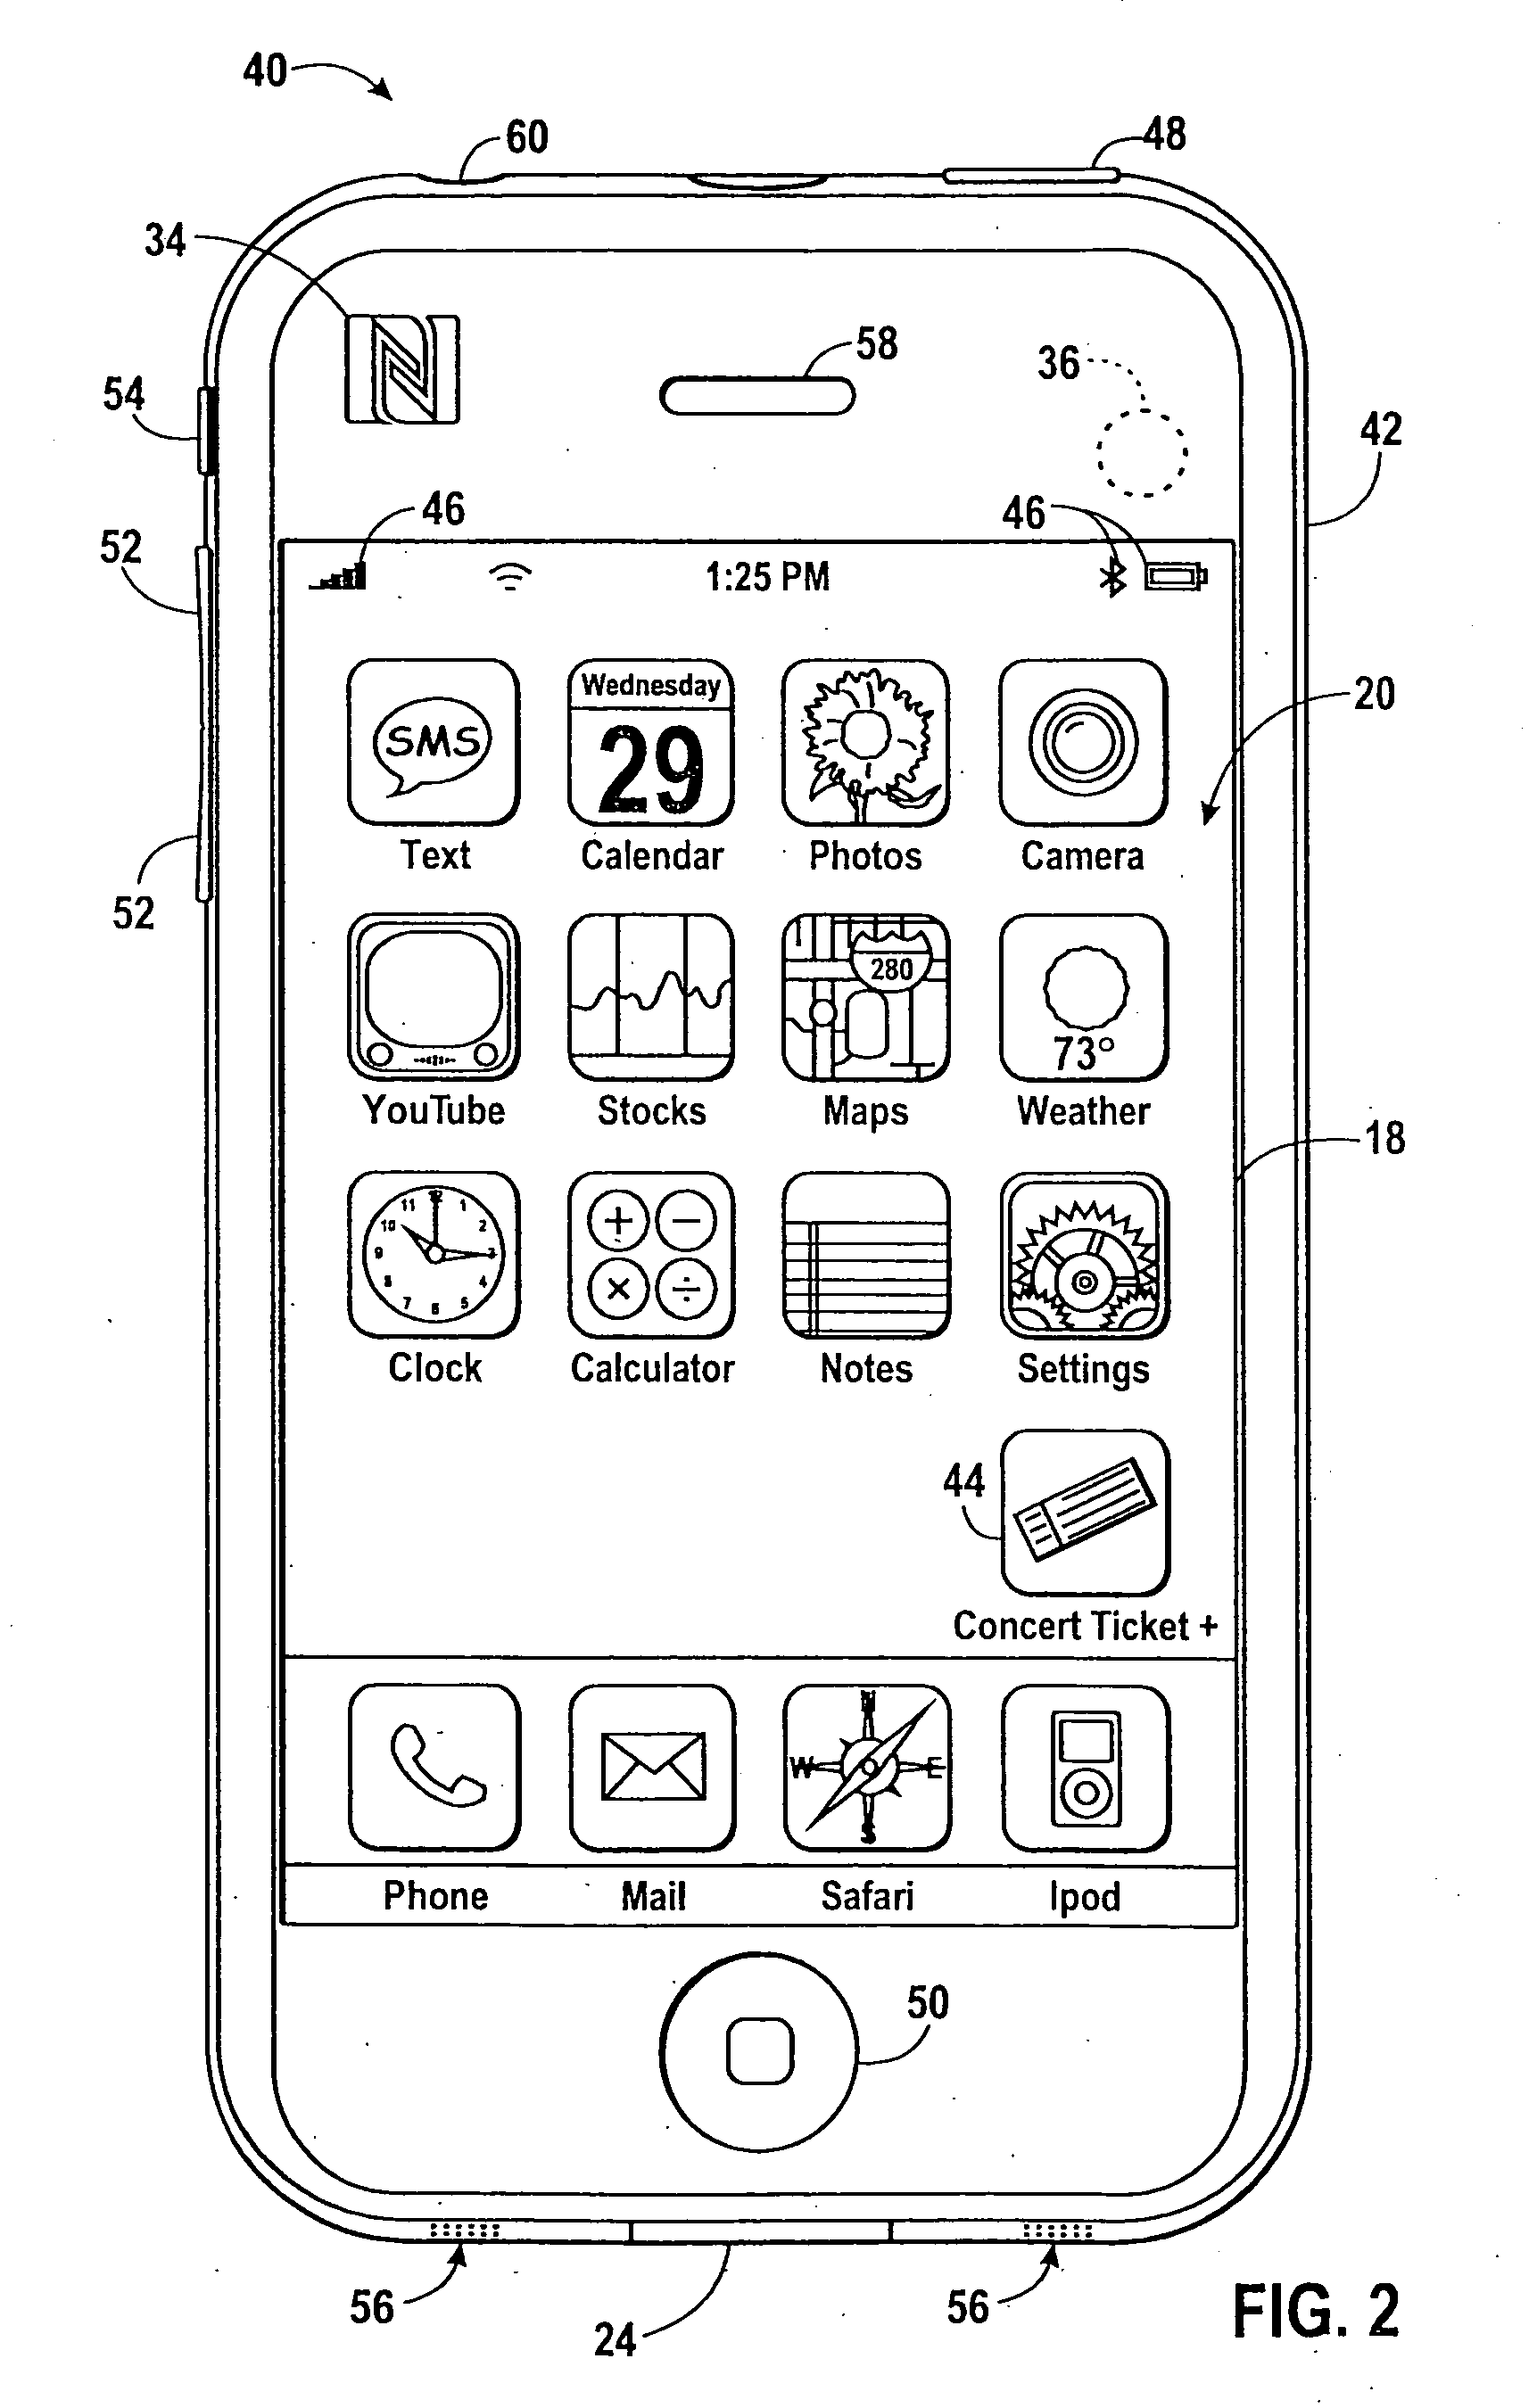 System and method for providing electronic event tickets